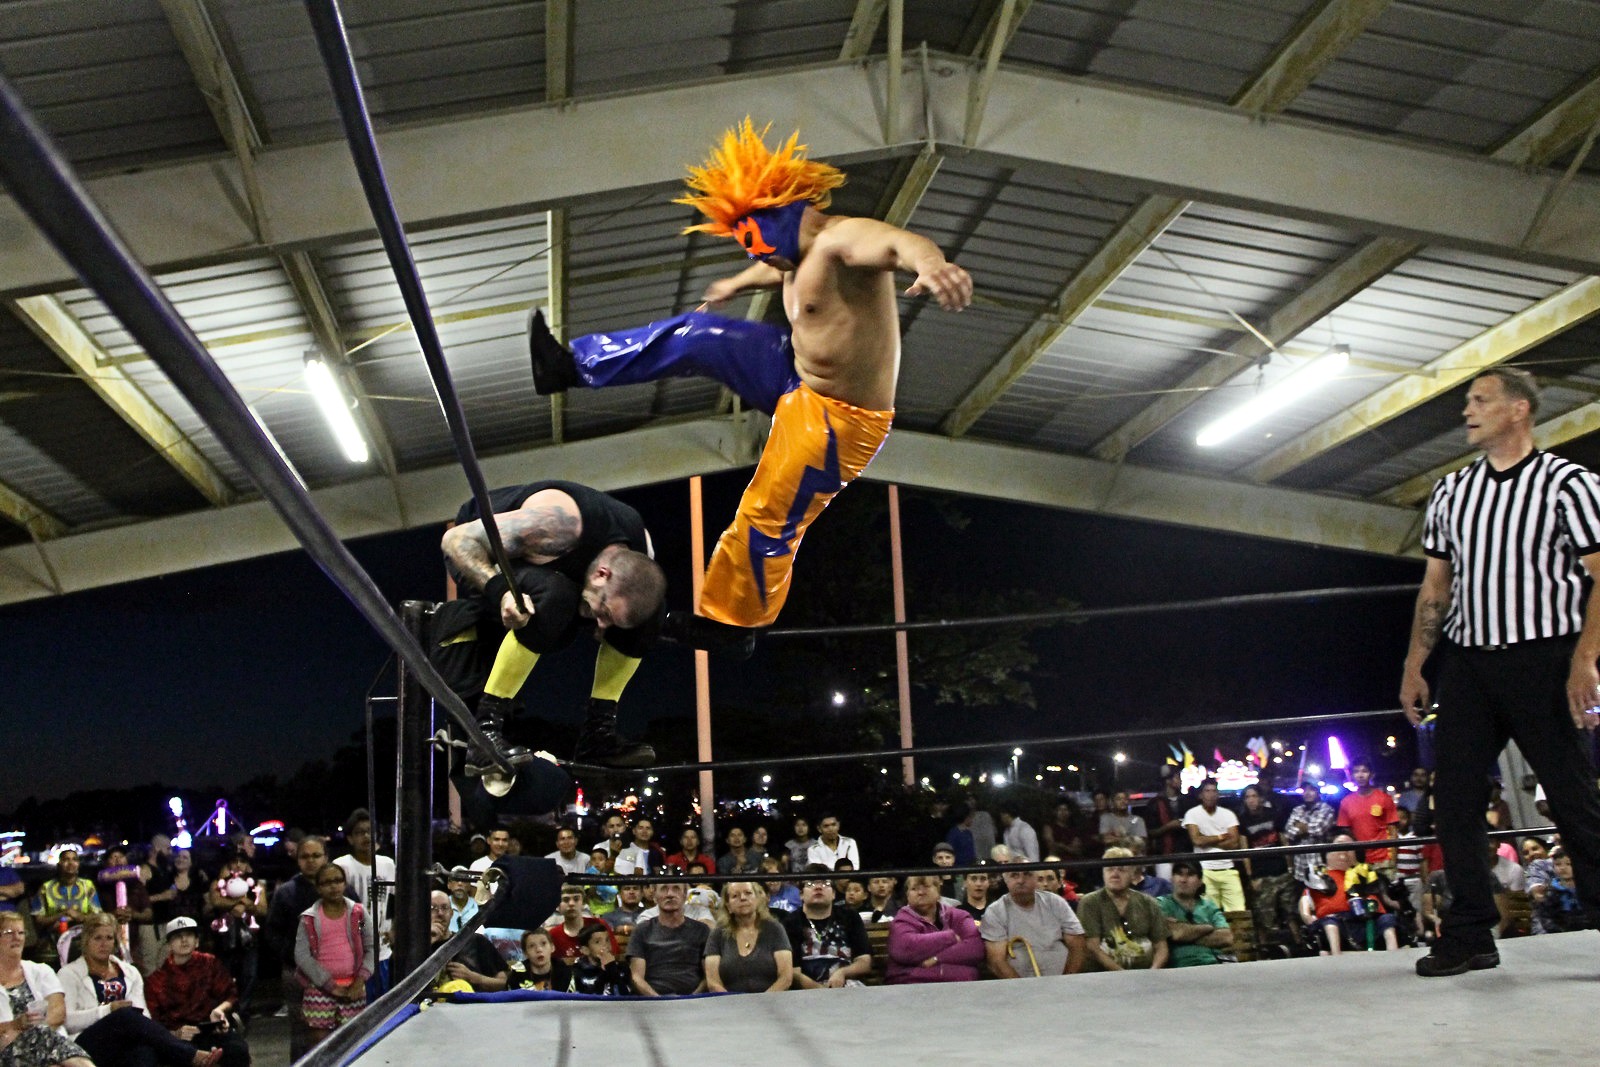 WATCH: NECW TV ONLINE 19: The Incredible Rise of Todo Loco